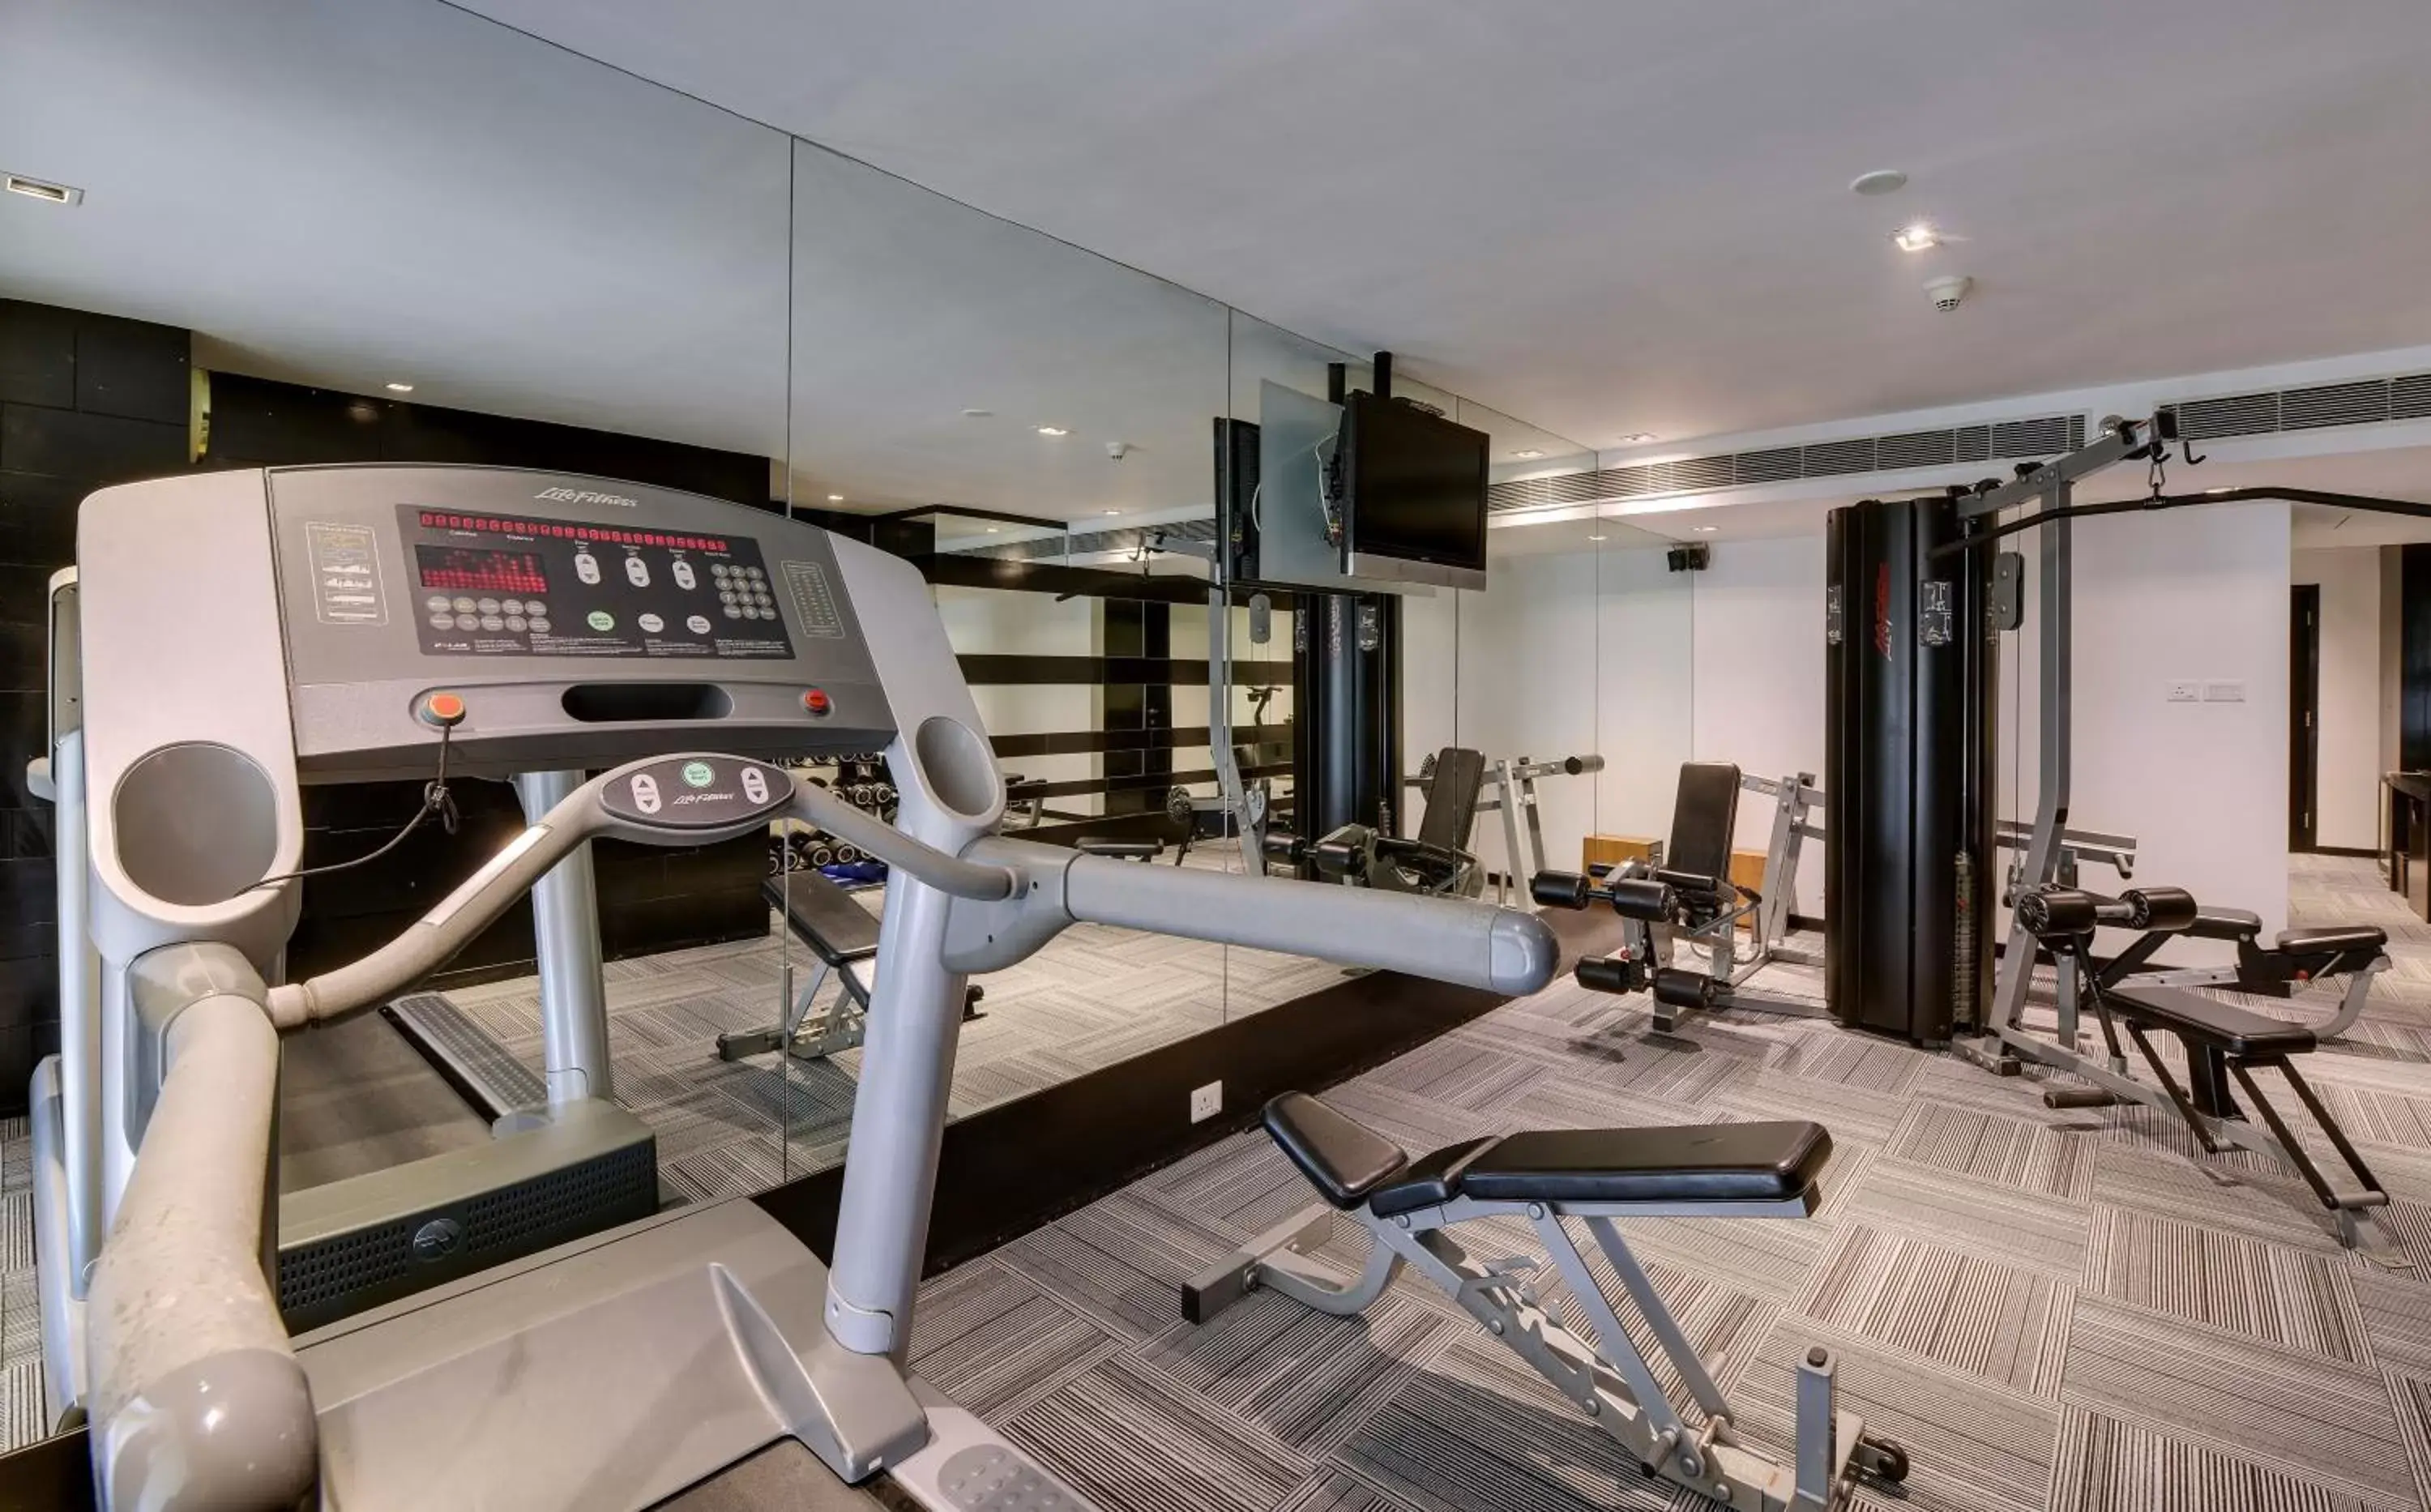 Fitness centre/facilities, Fitness Center/Facilities in Svelte Hotel and Personal Suites